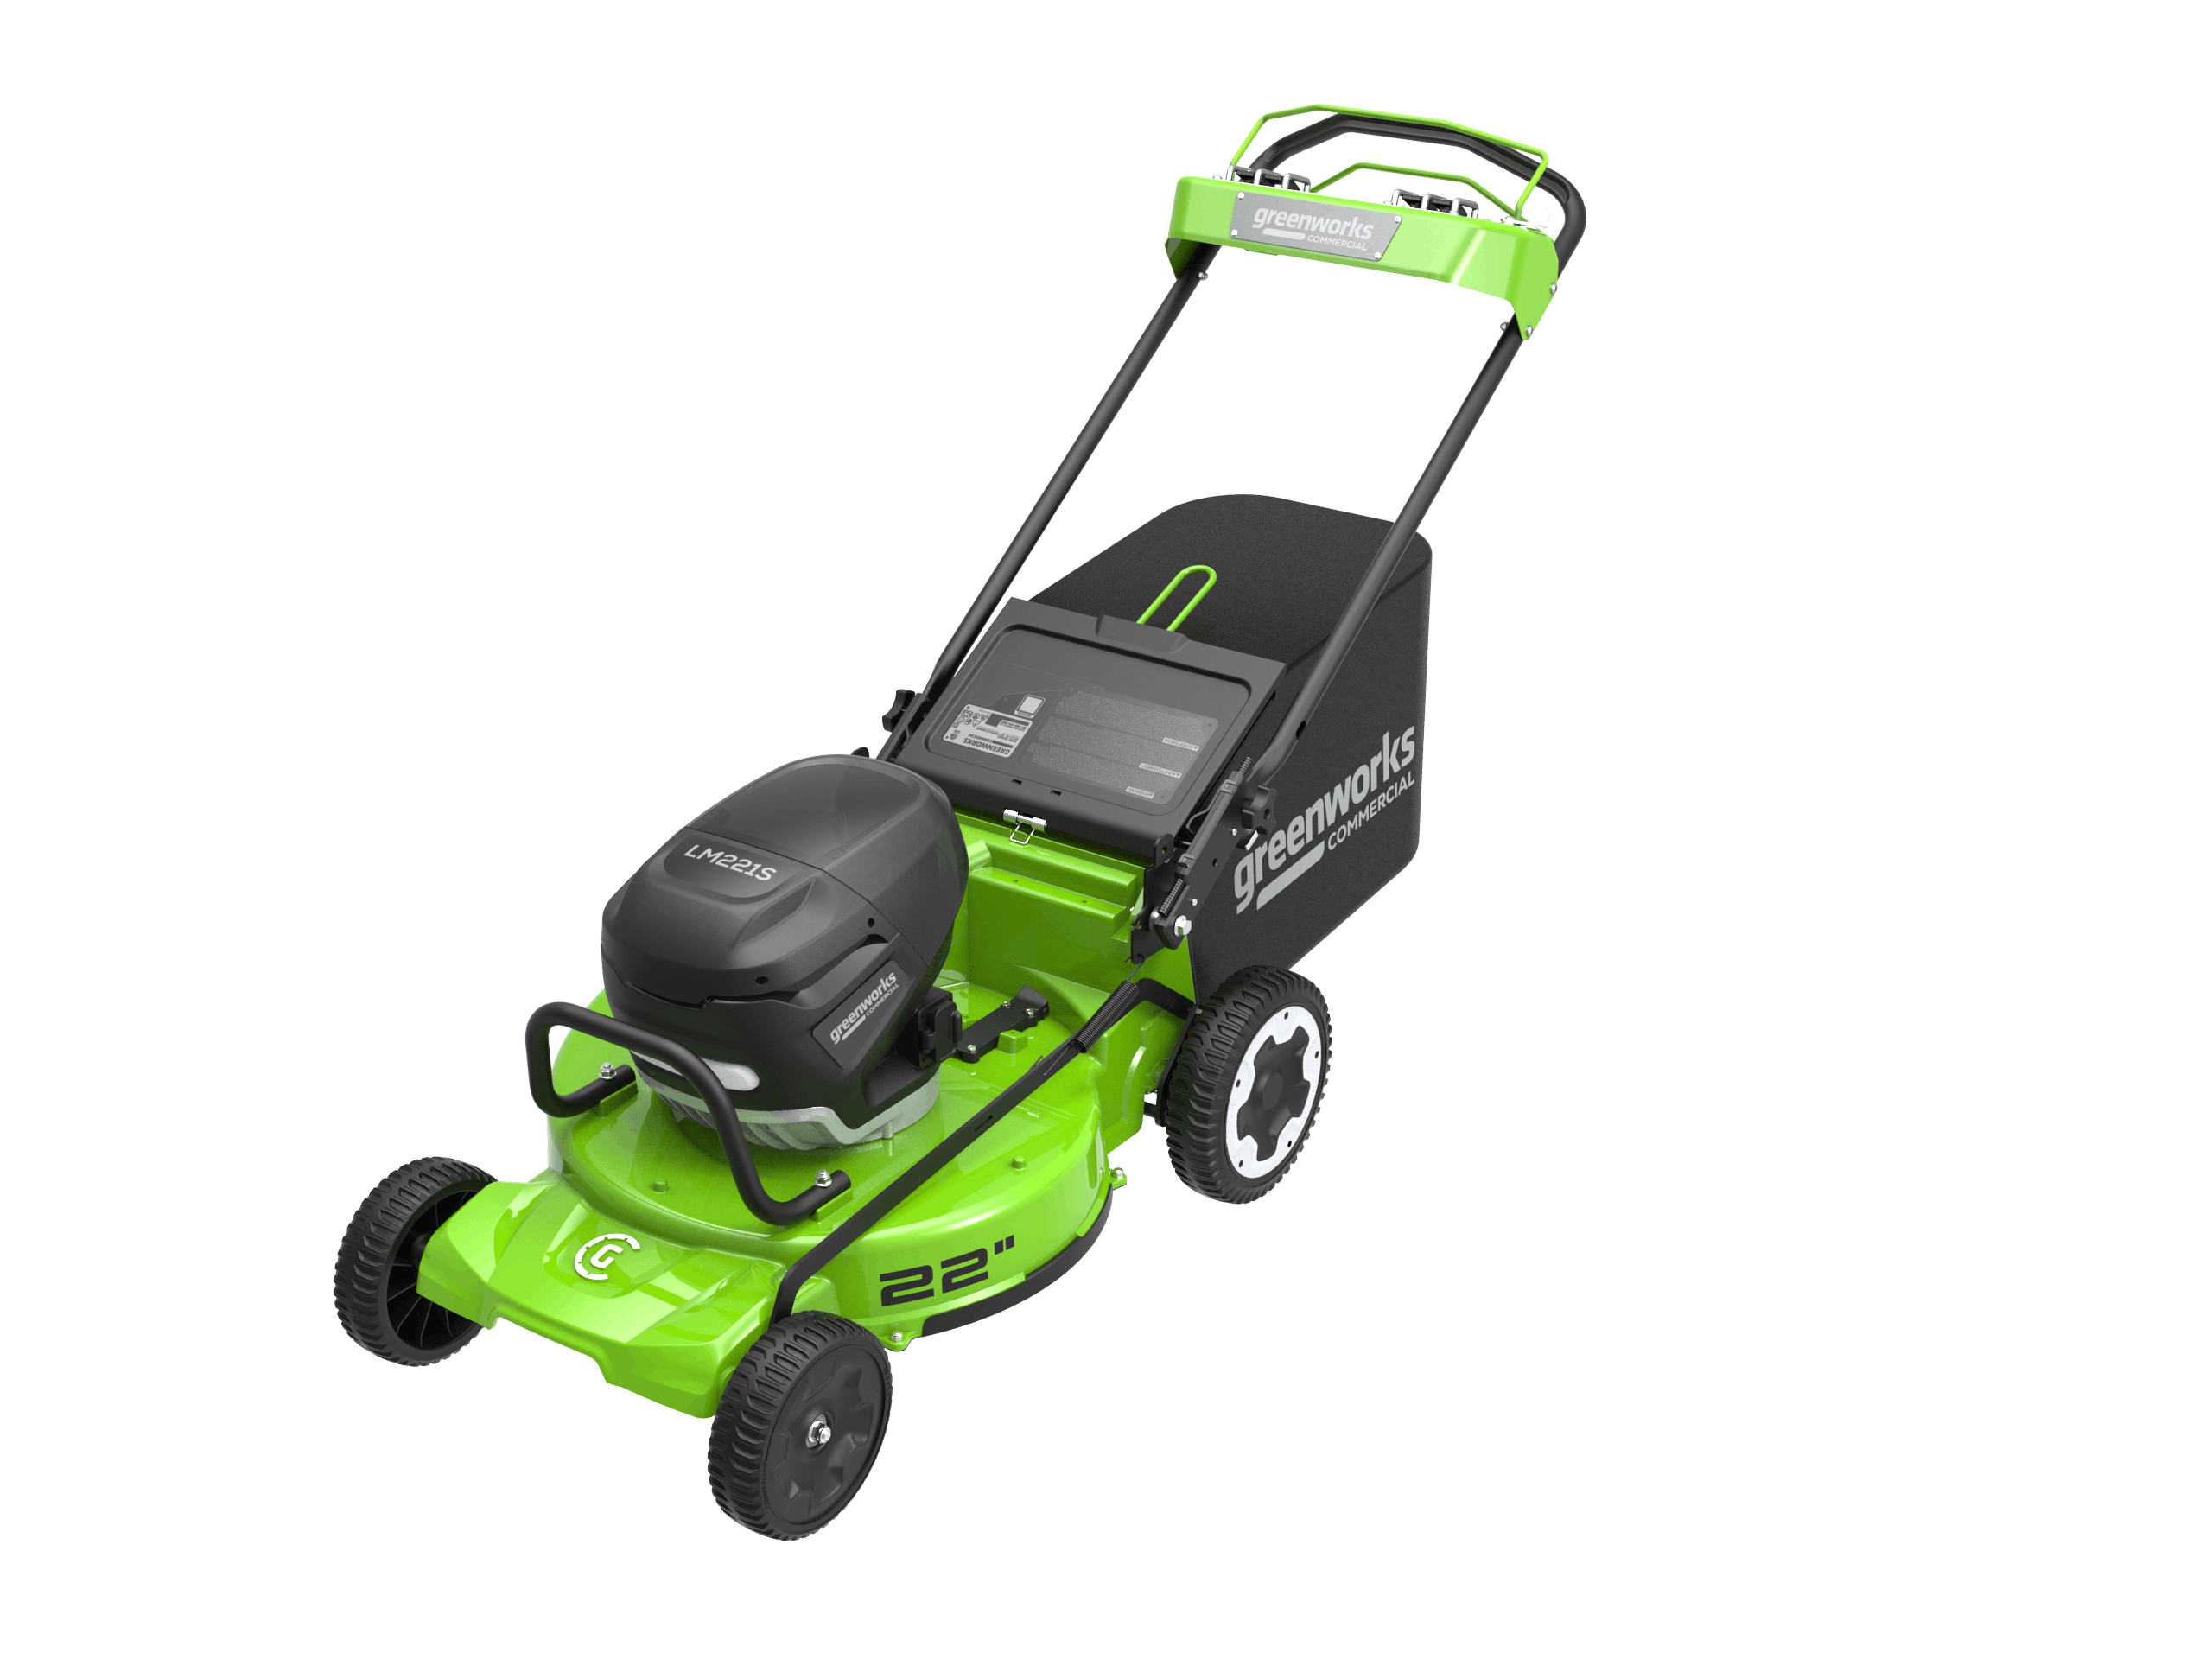 Greenworks Adds New Self-Propelled Mower From: Greenworks Commercial